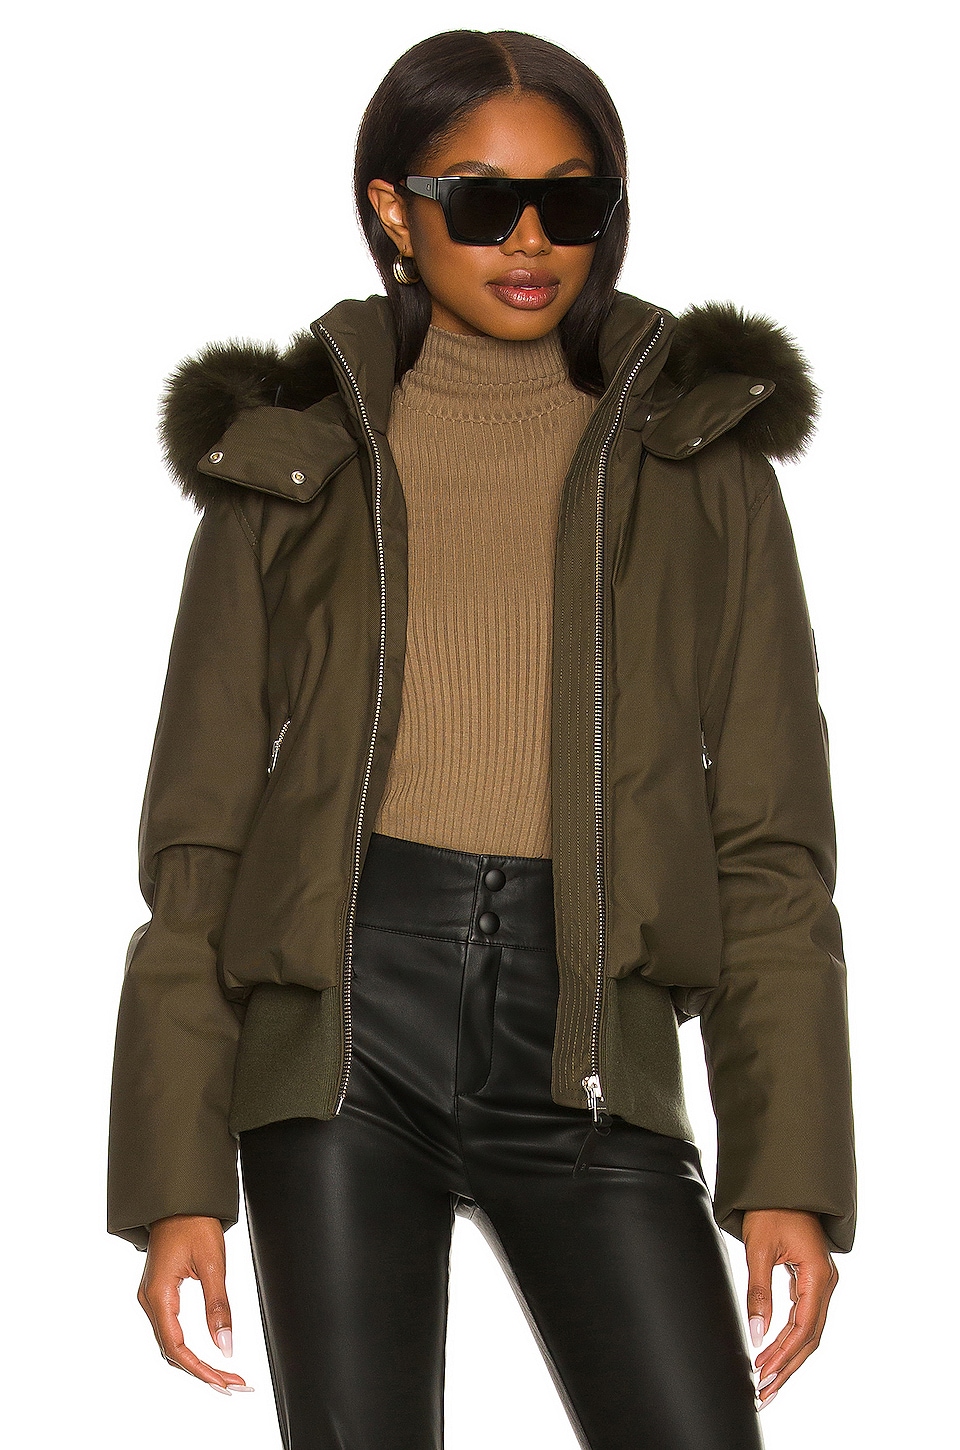 Mackage Cory-Bx Bomber Jacket in Army | REVOLVE